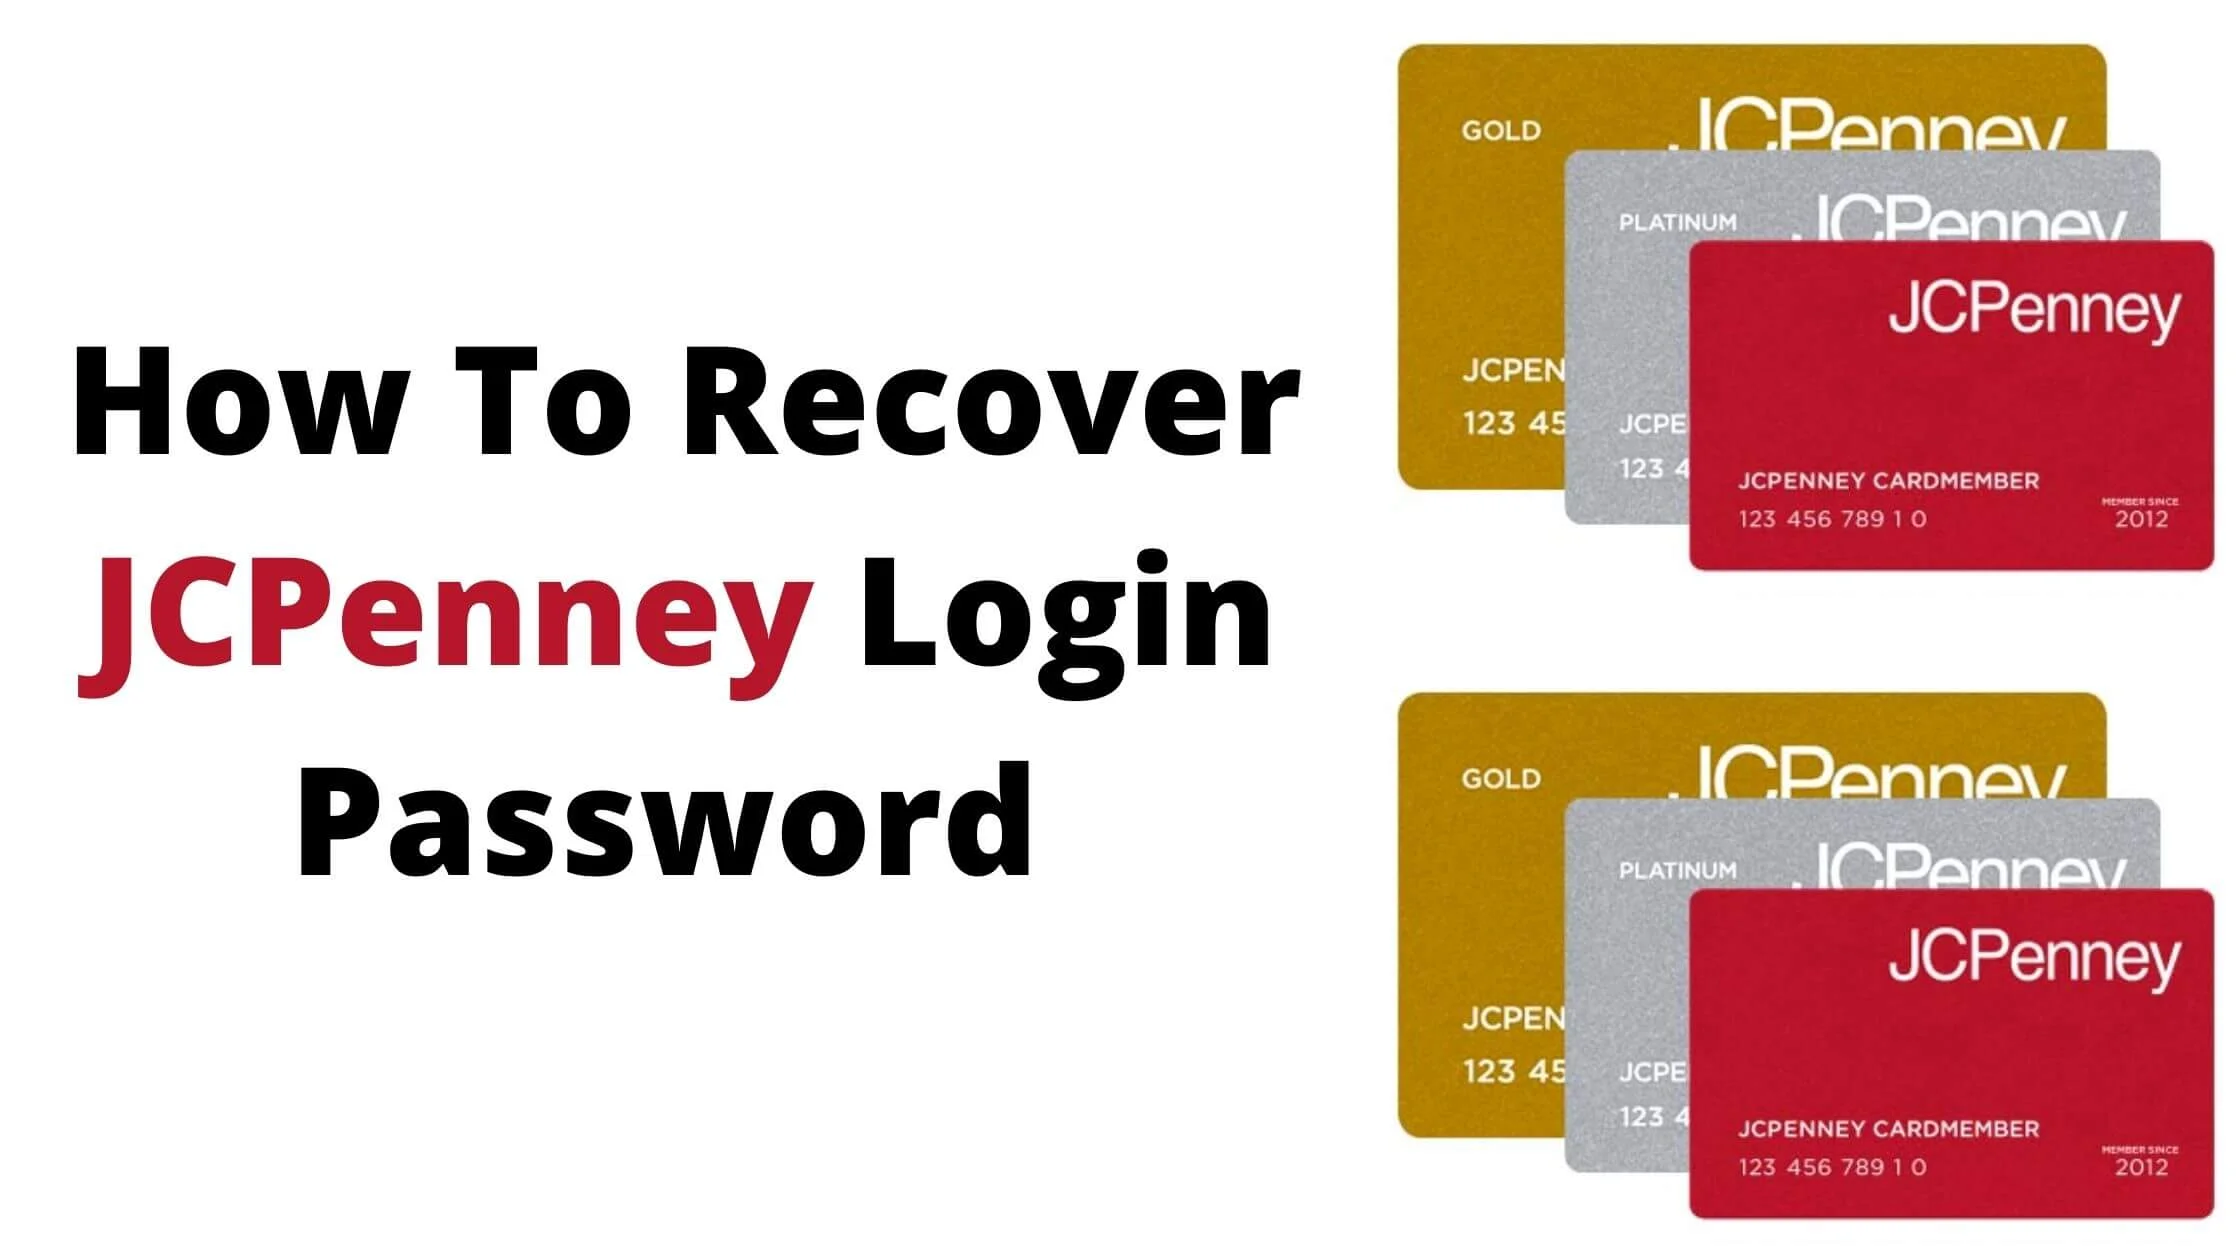 How To Recover JCPenney Login Password